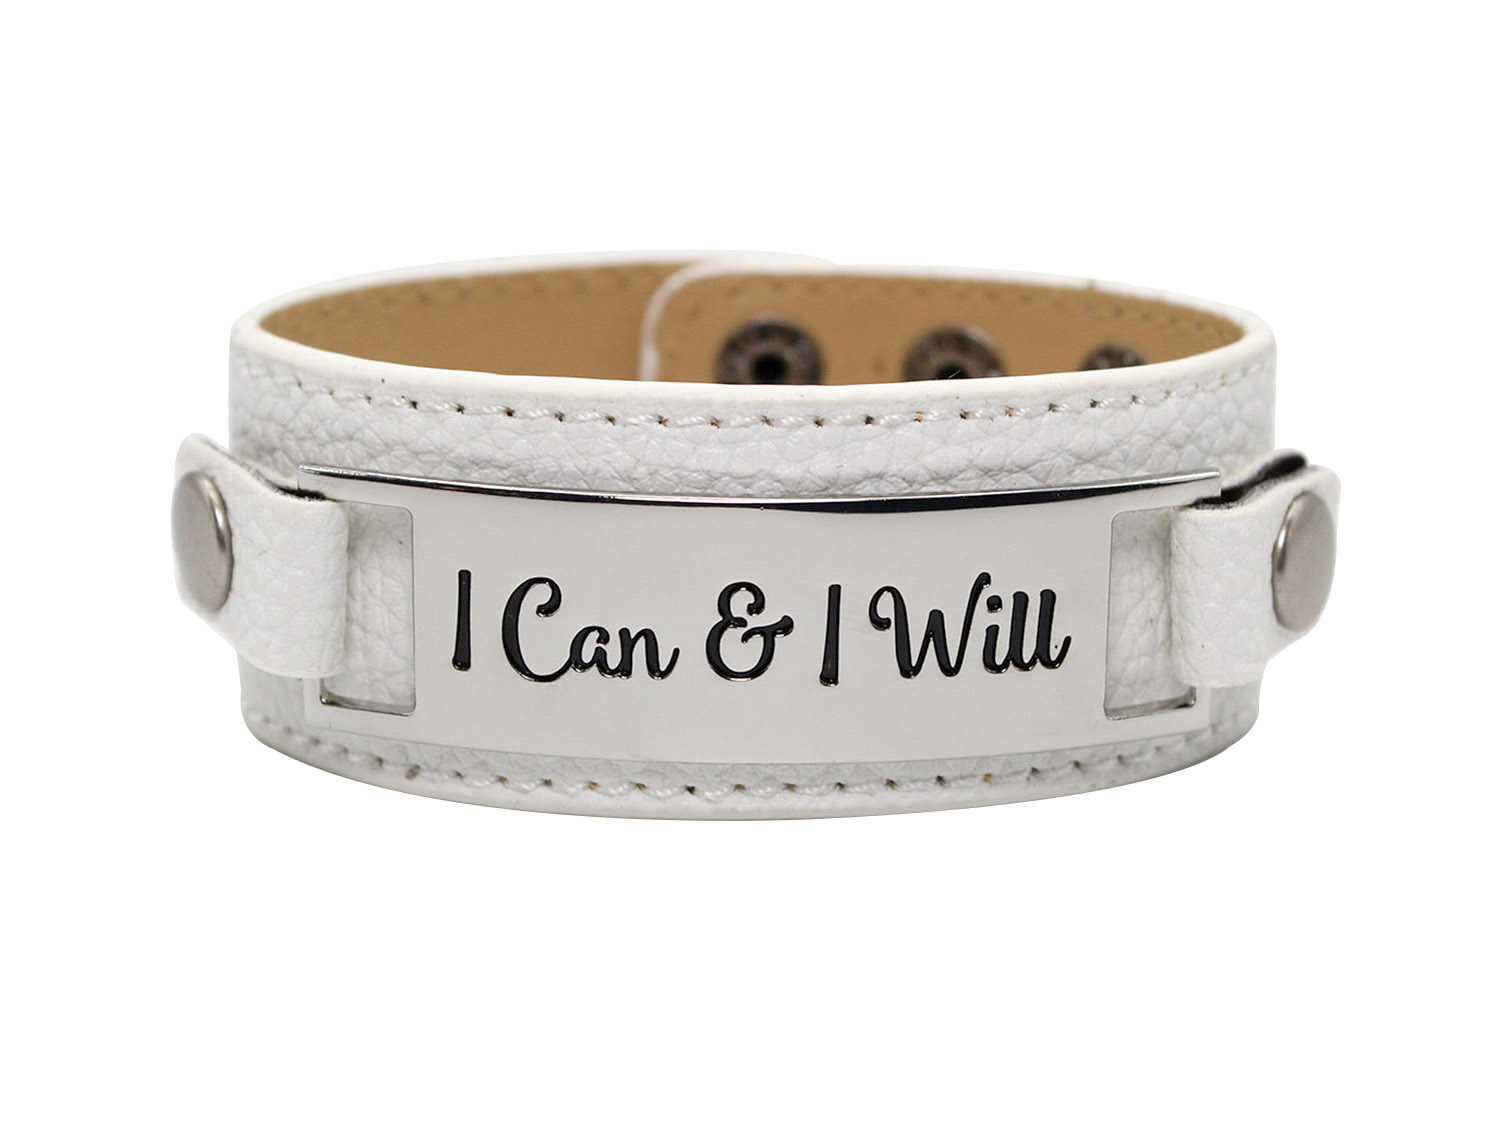 Classic Cuff with Metal Plaque "I Can & I Will"